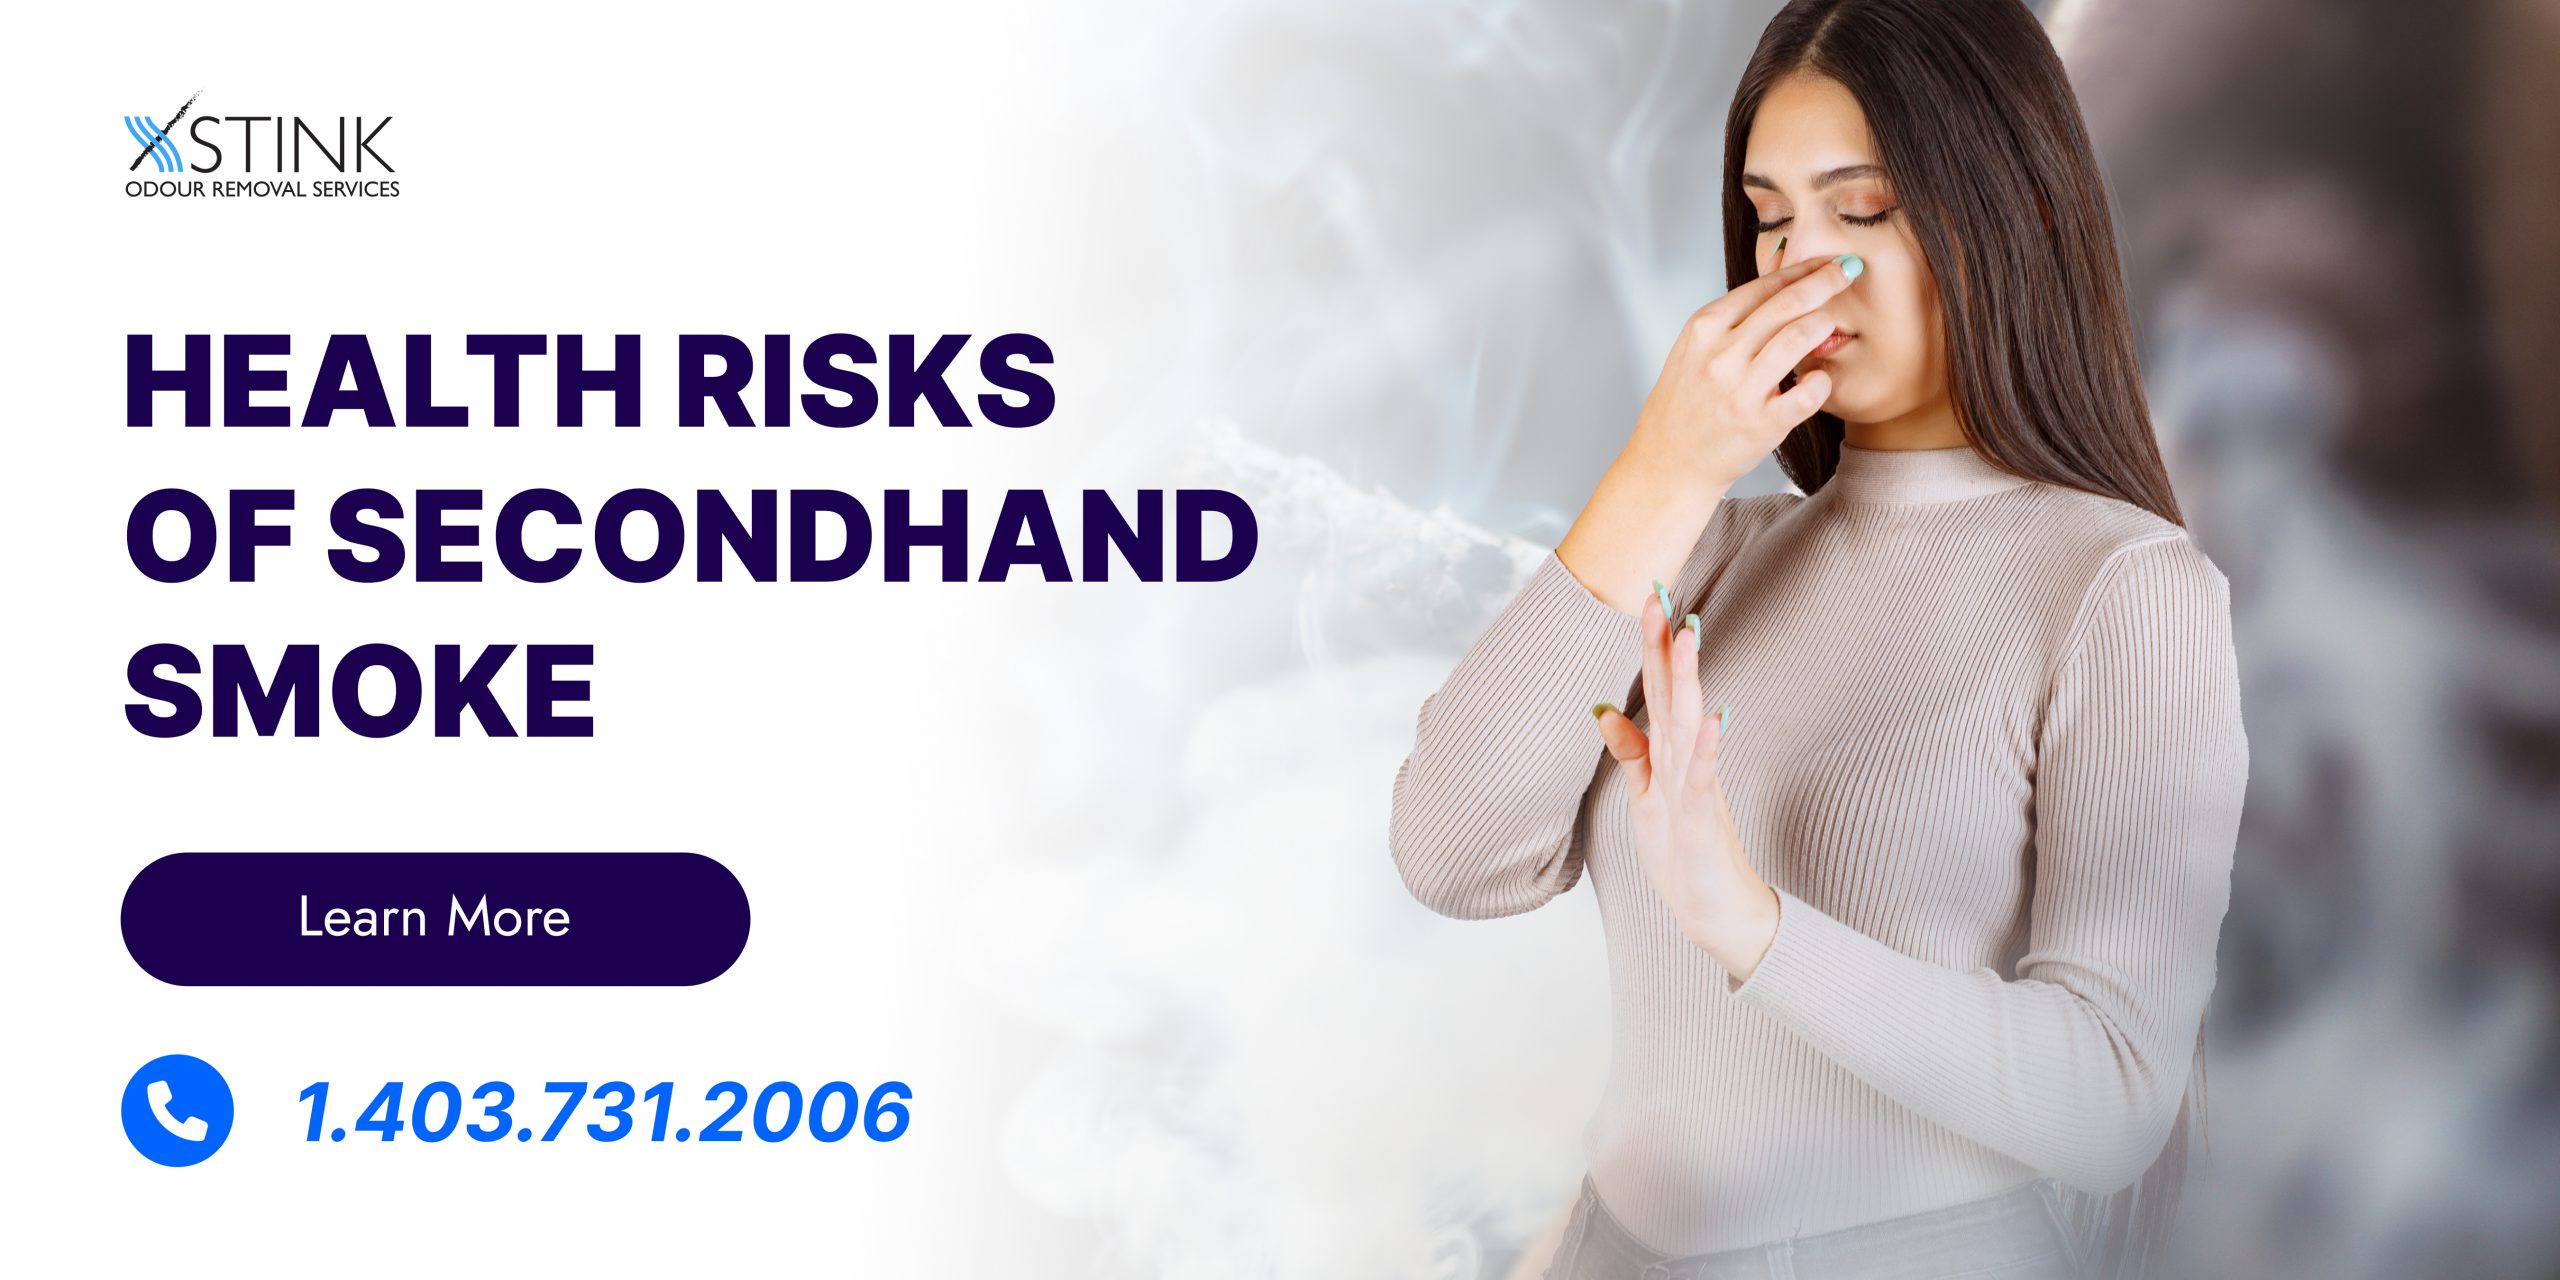 Health risks of secondhand smoke